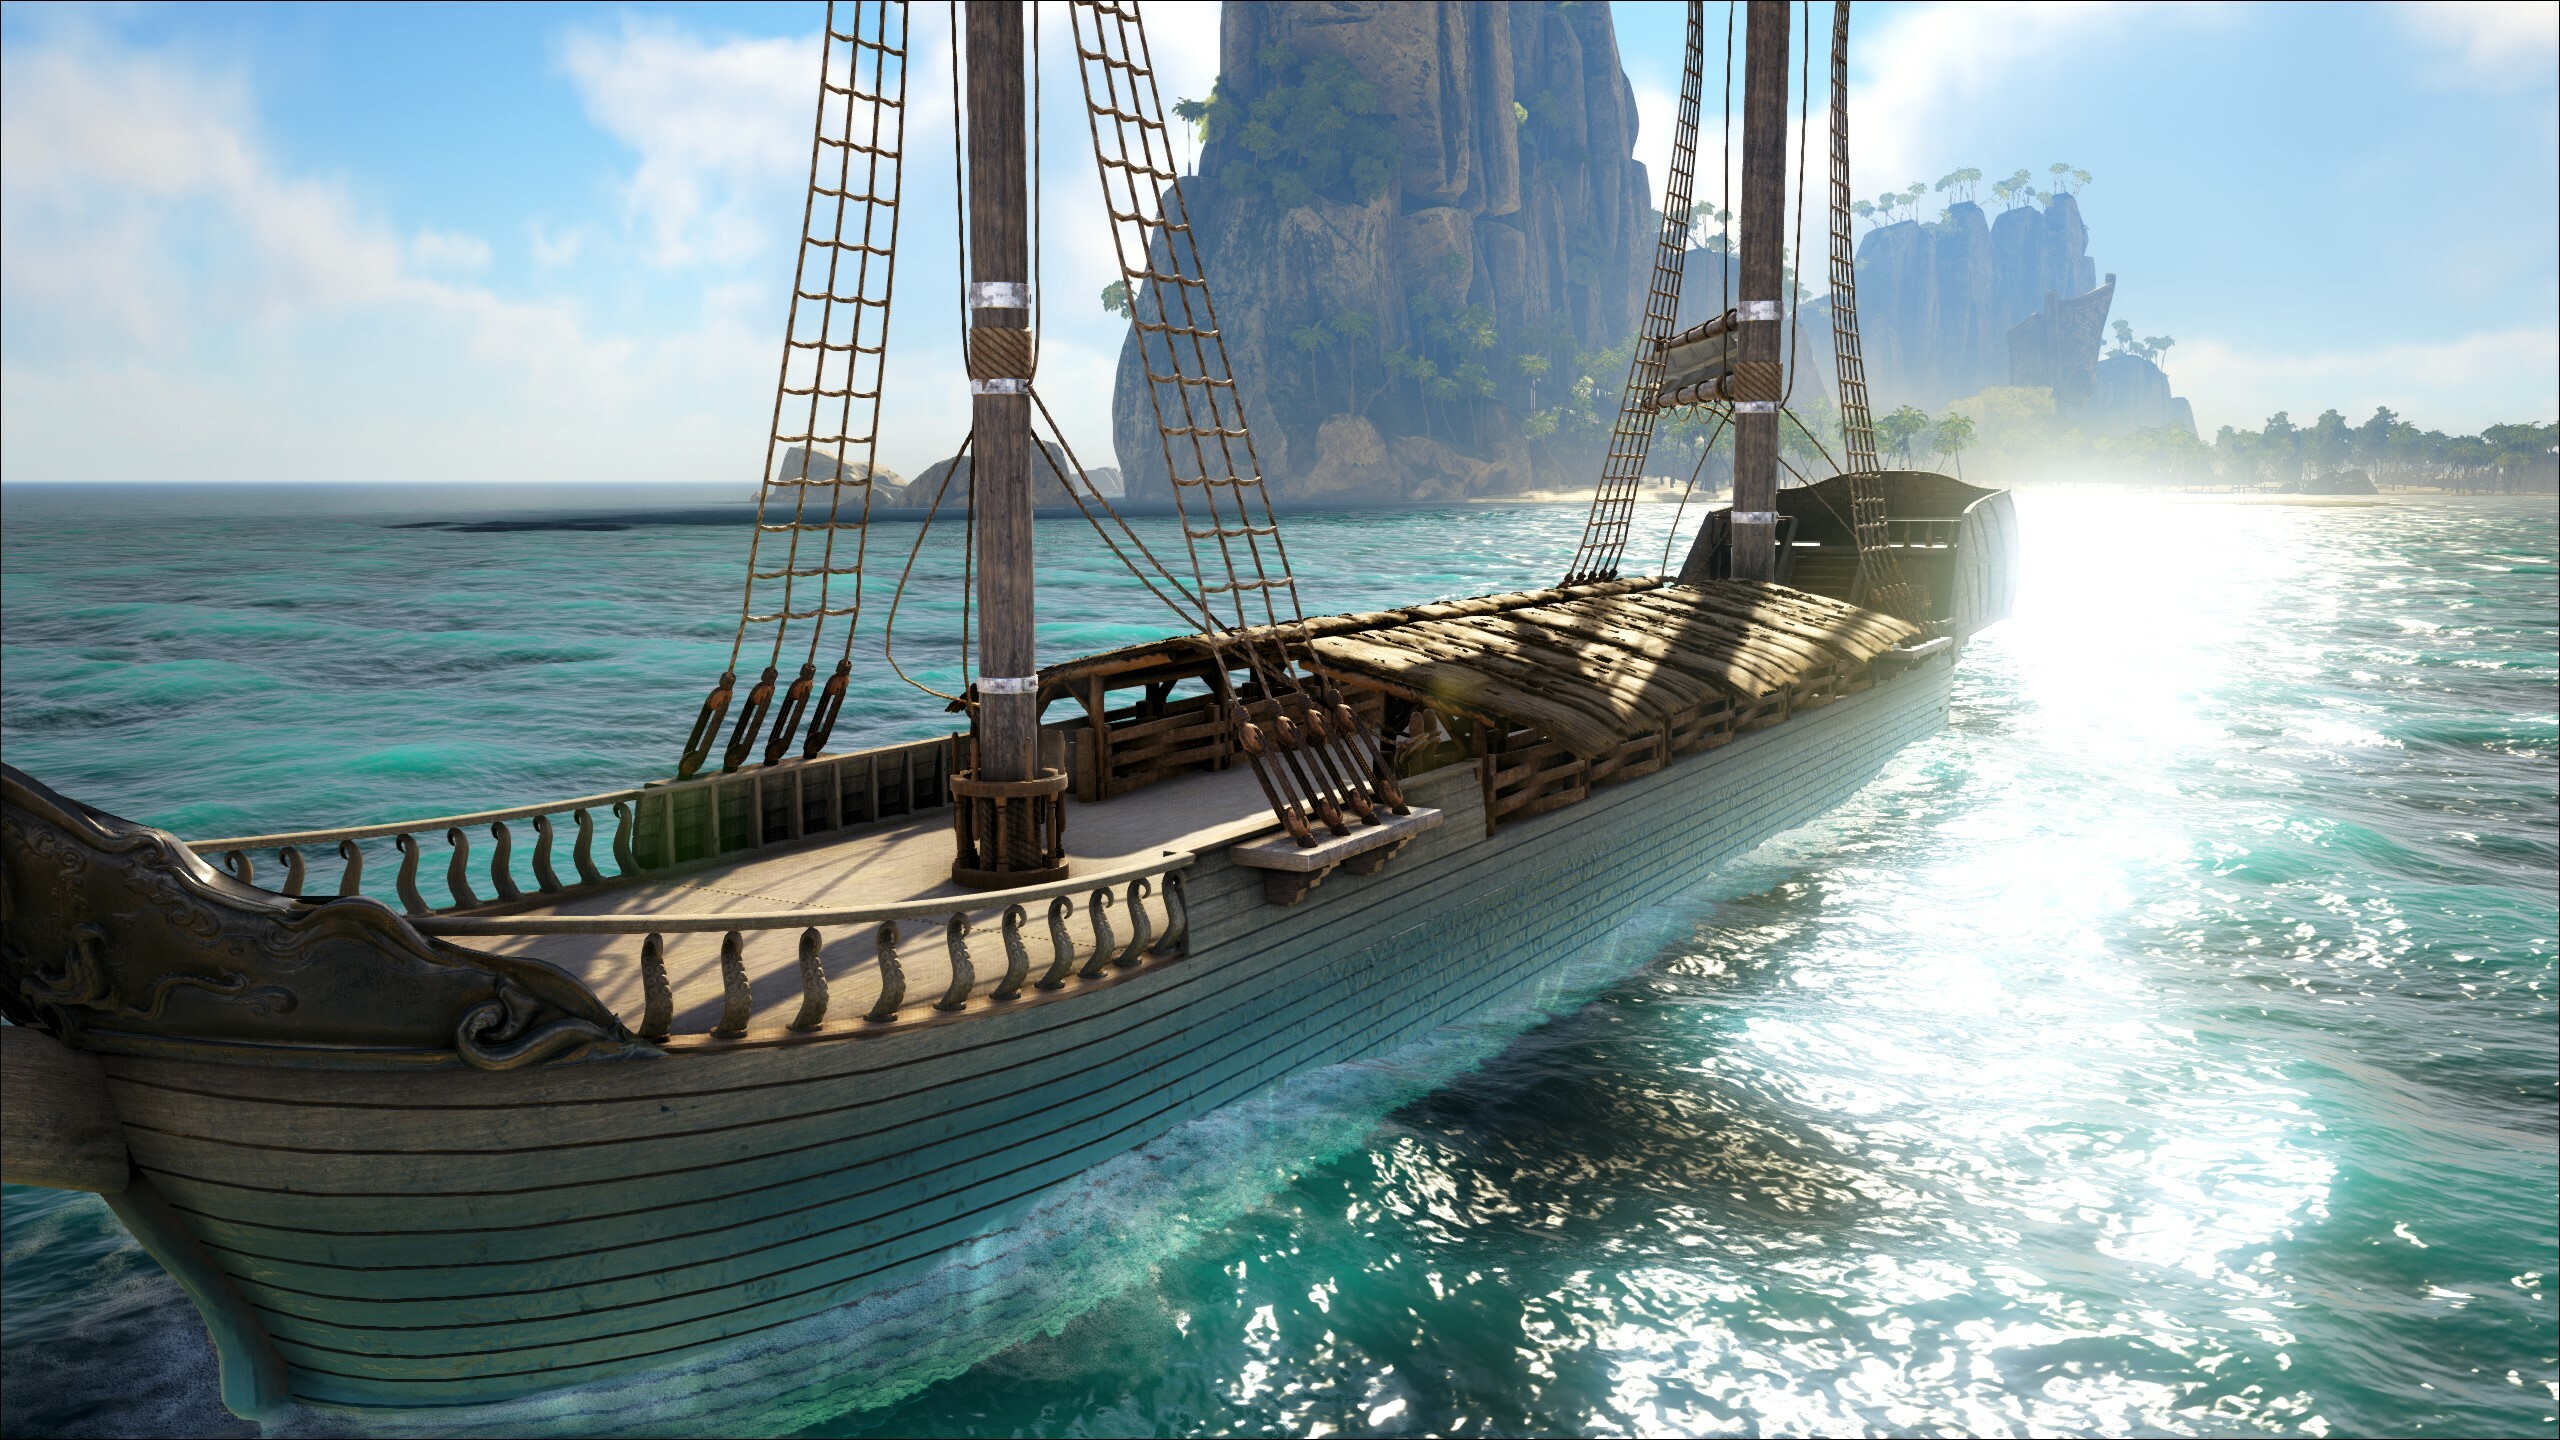 Skull and Bones Shows Us Lots of Exploding Boats in New Gameplay Trailer